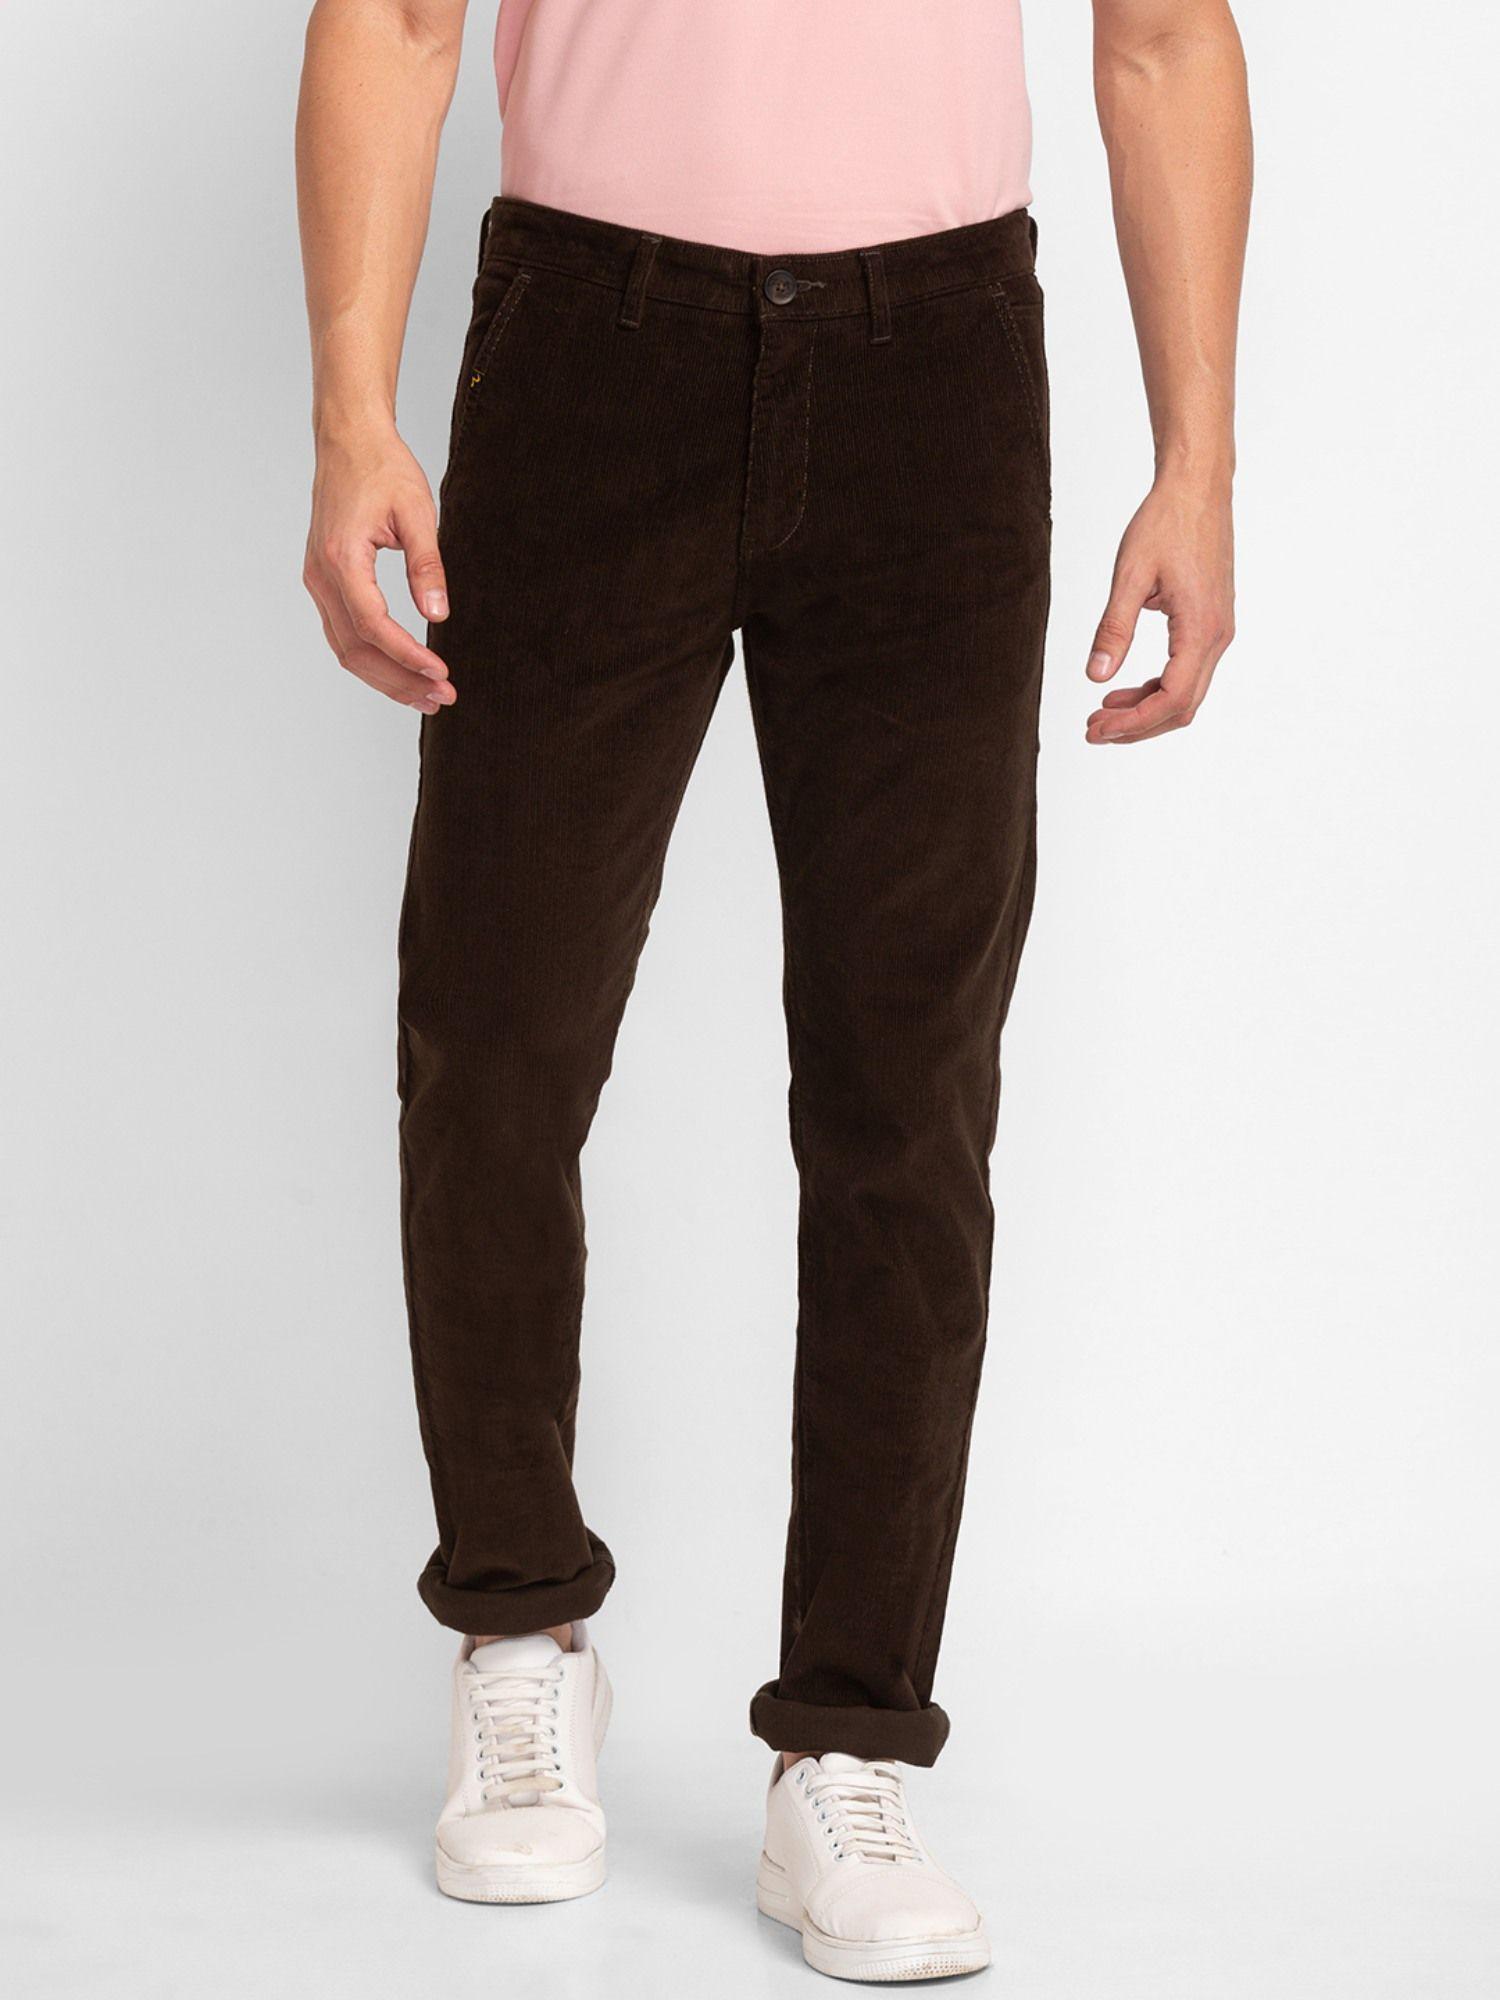 brown cotton blend mid rise trousers for men